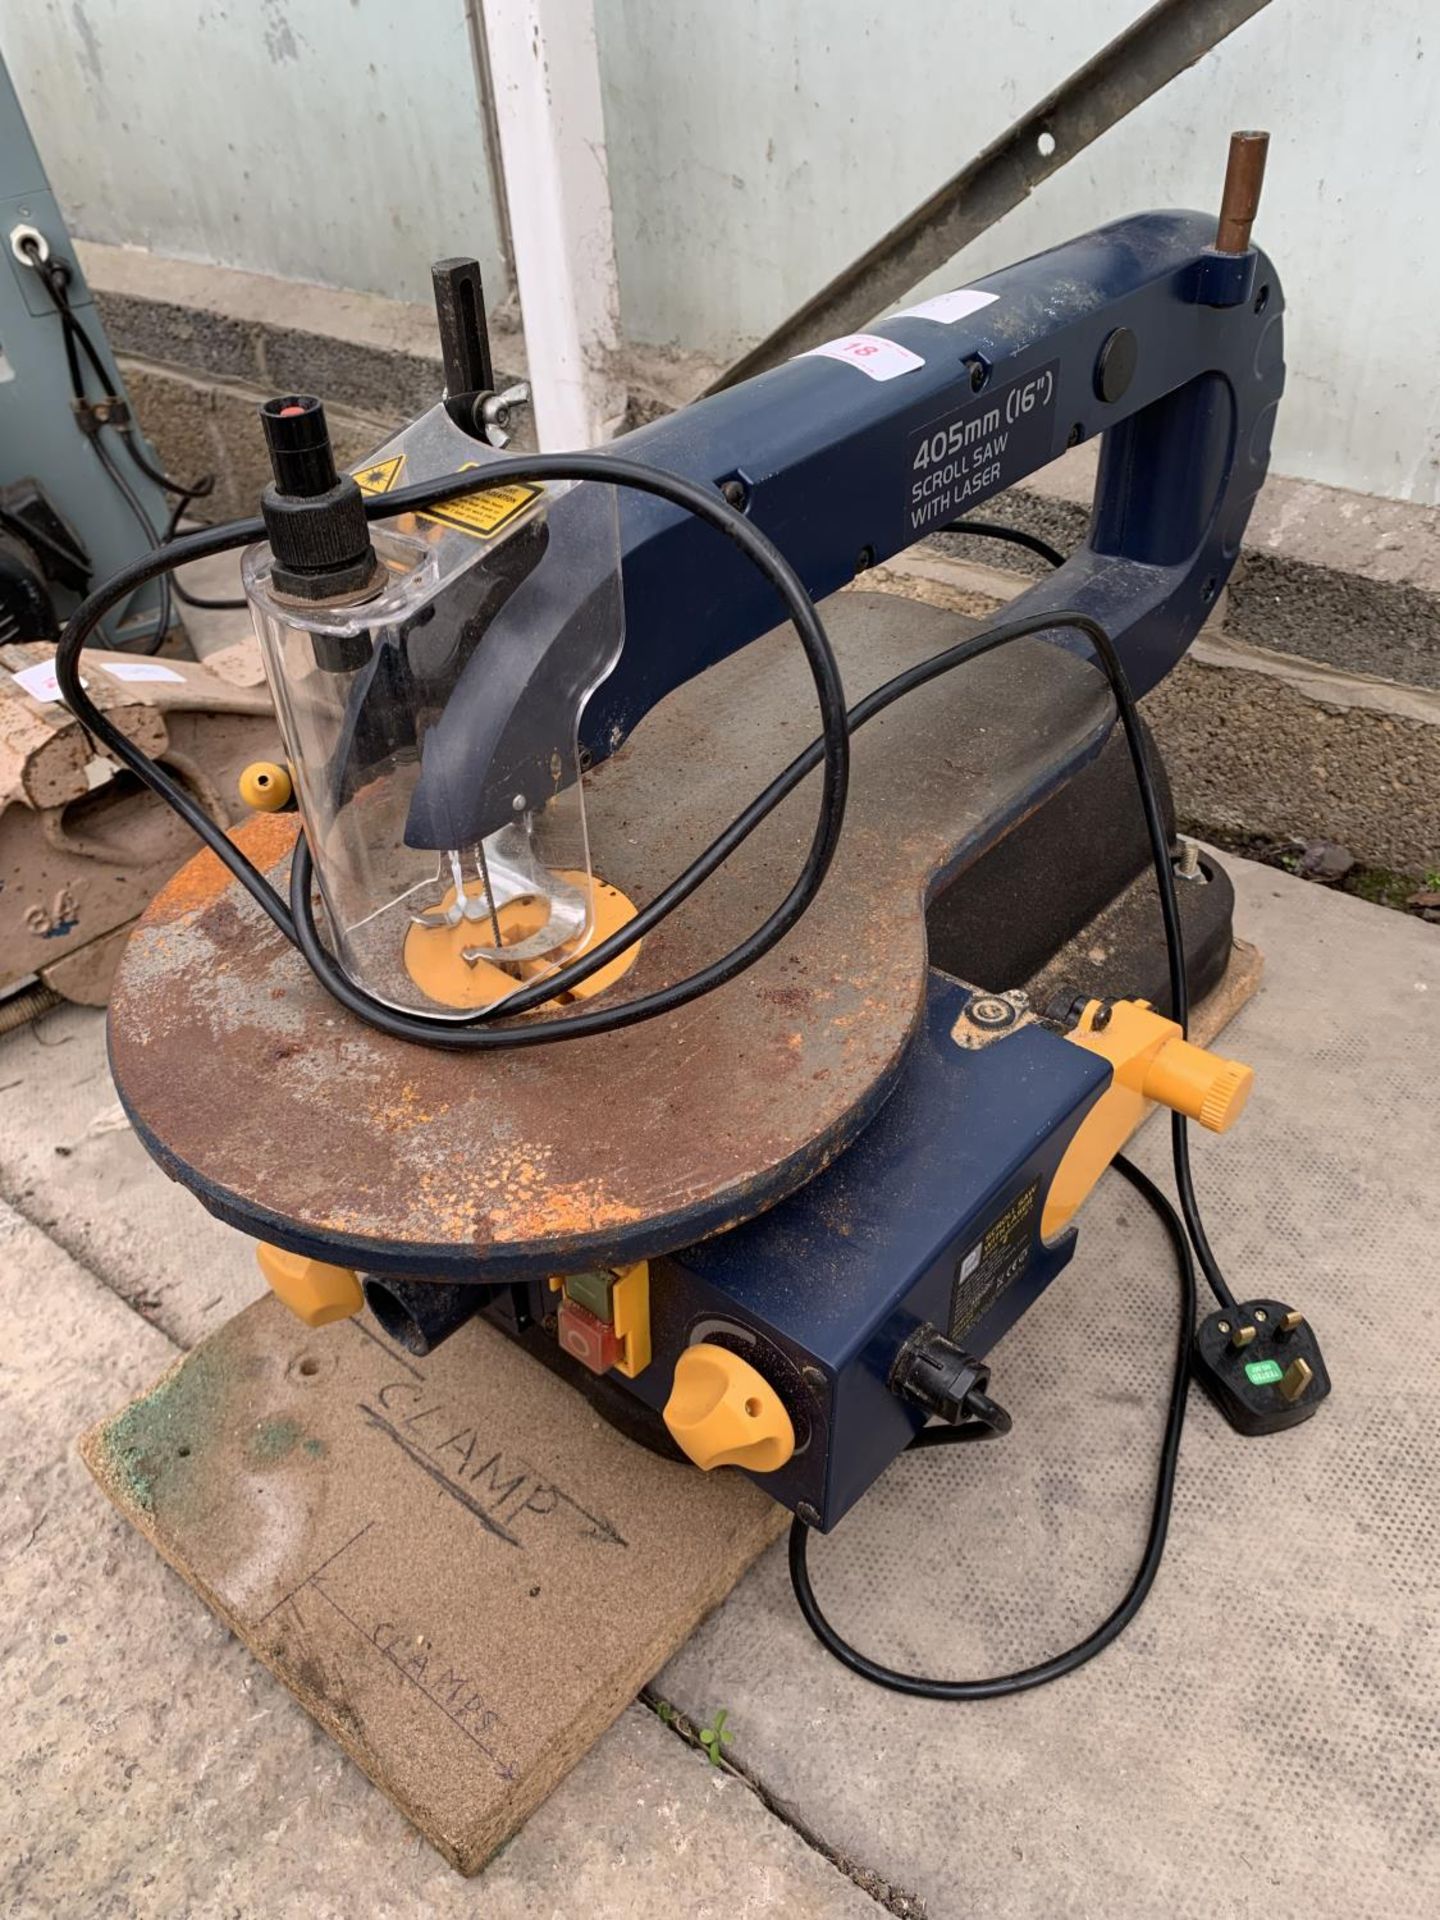 A PRO 405mm SCROLL SAW WITH LASER NO VAT